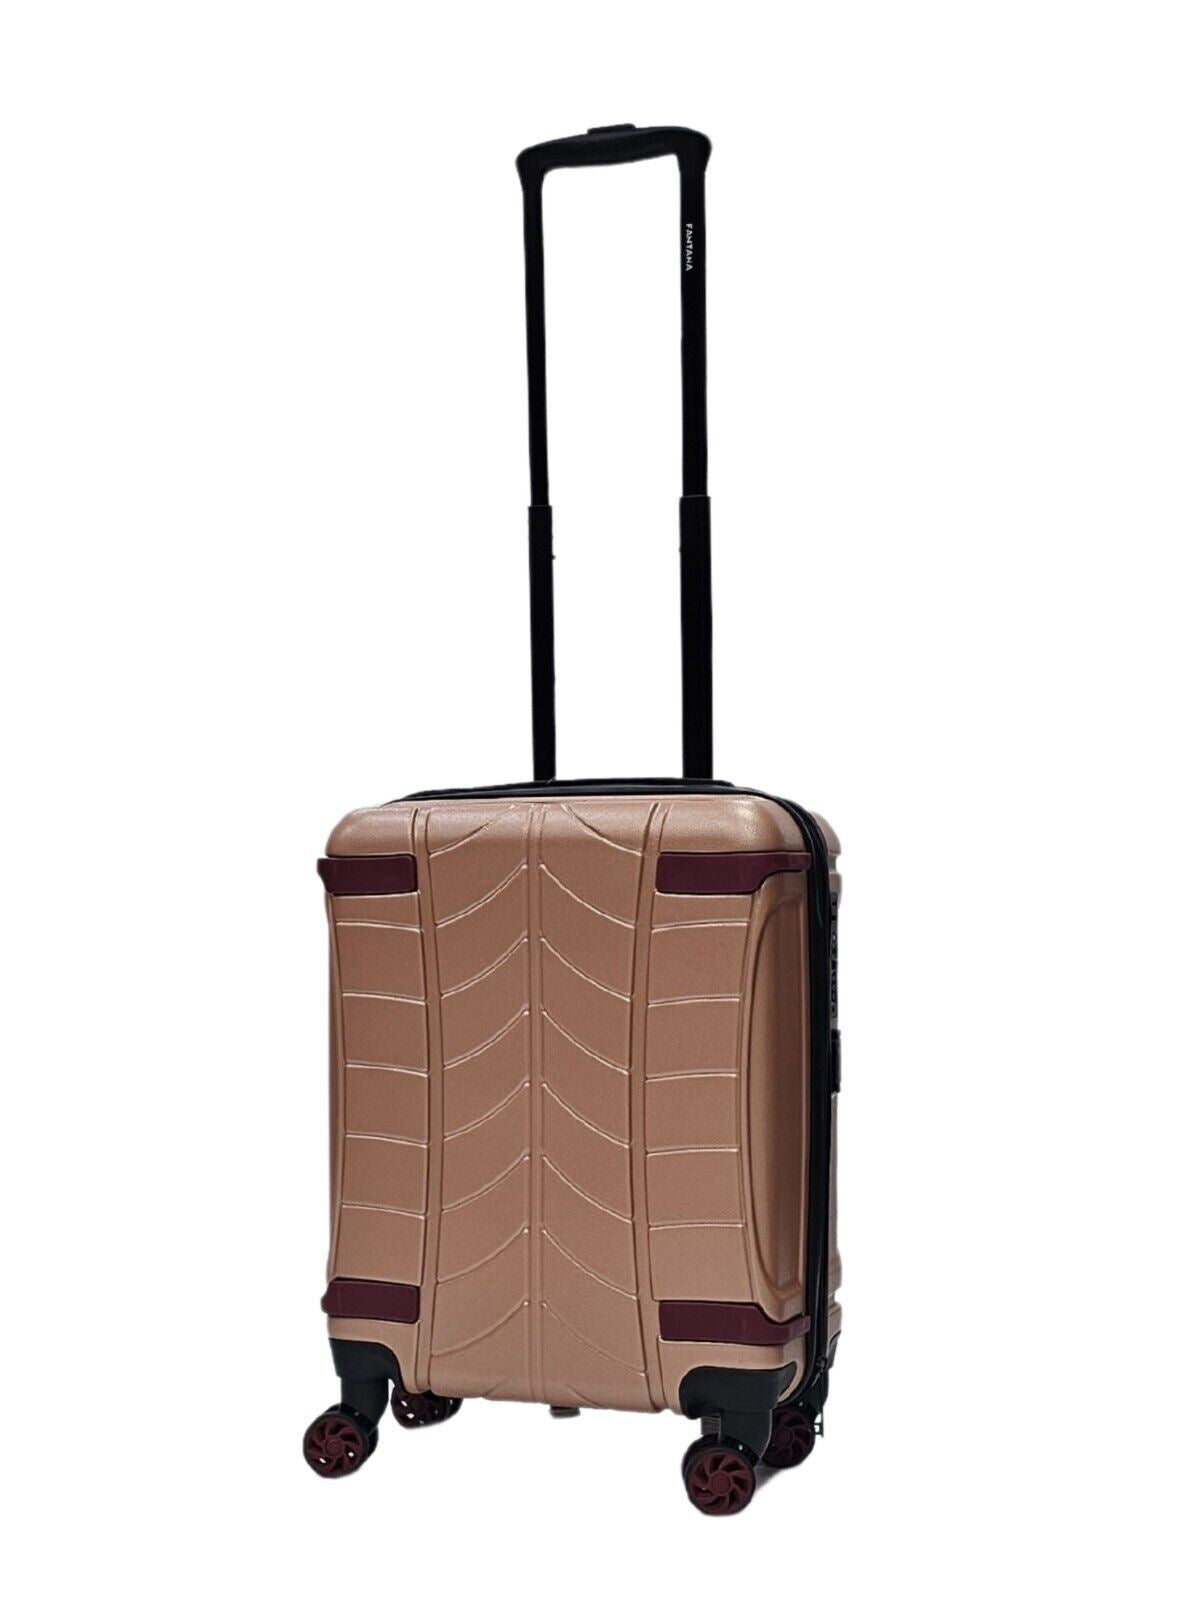 Bynum Cabin Hard Shell Suitcase in Rose Gold